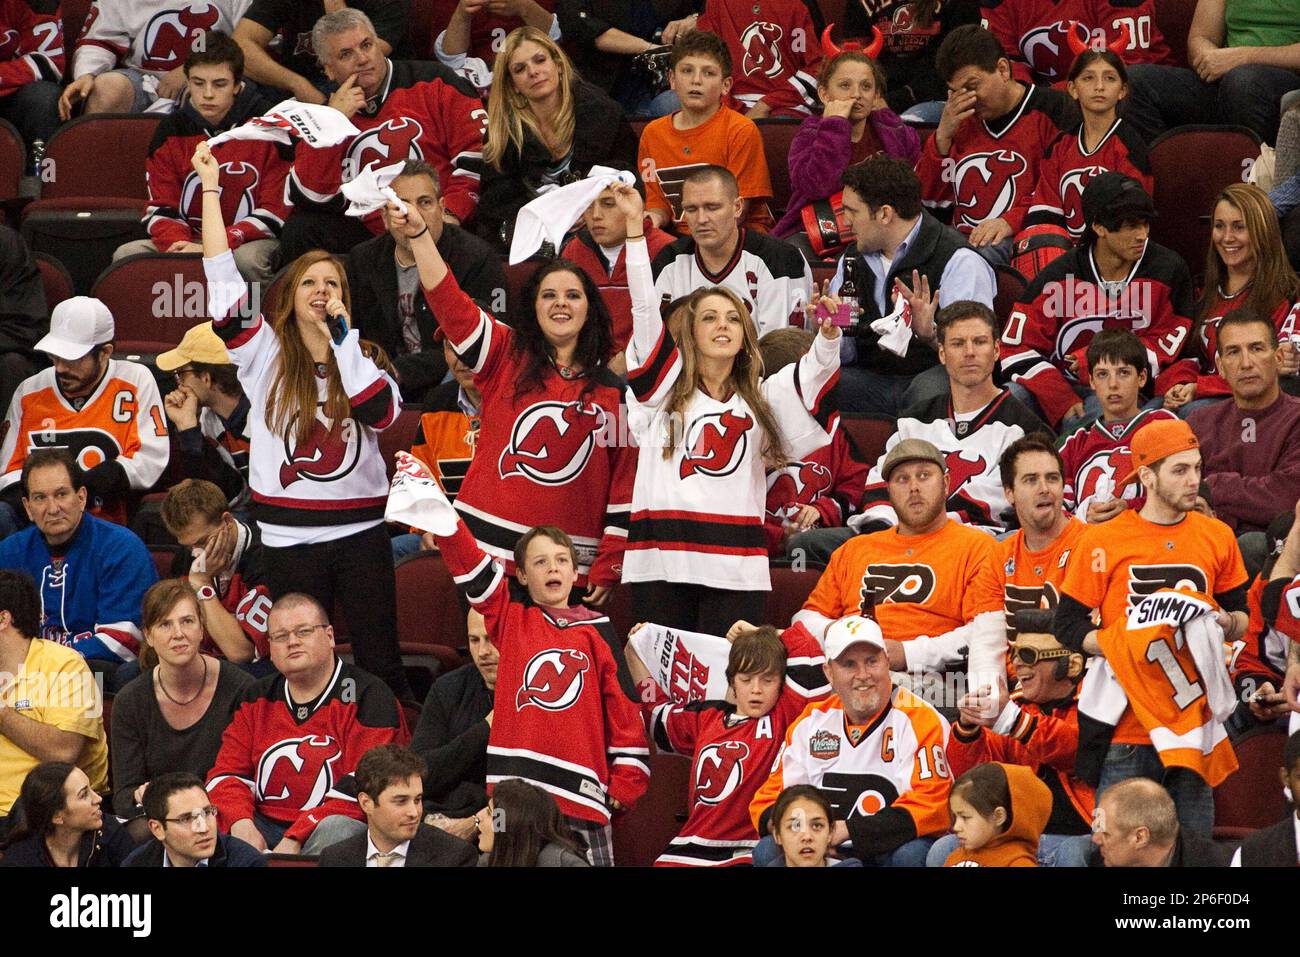 May 3 2012: Devils' fans cheer while flanked by Flyers' fans